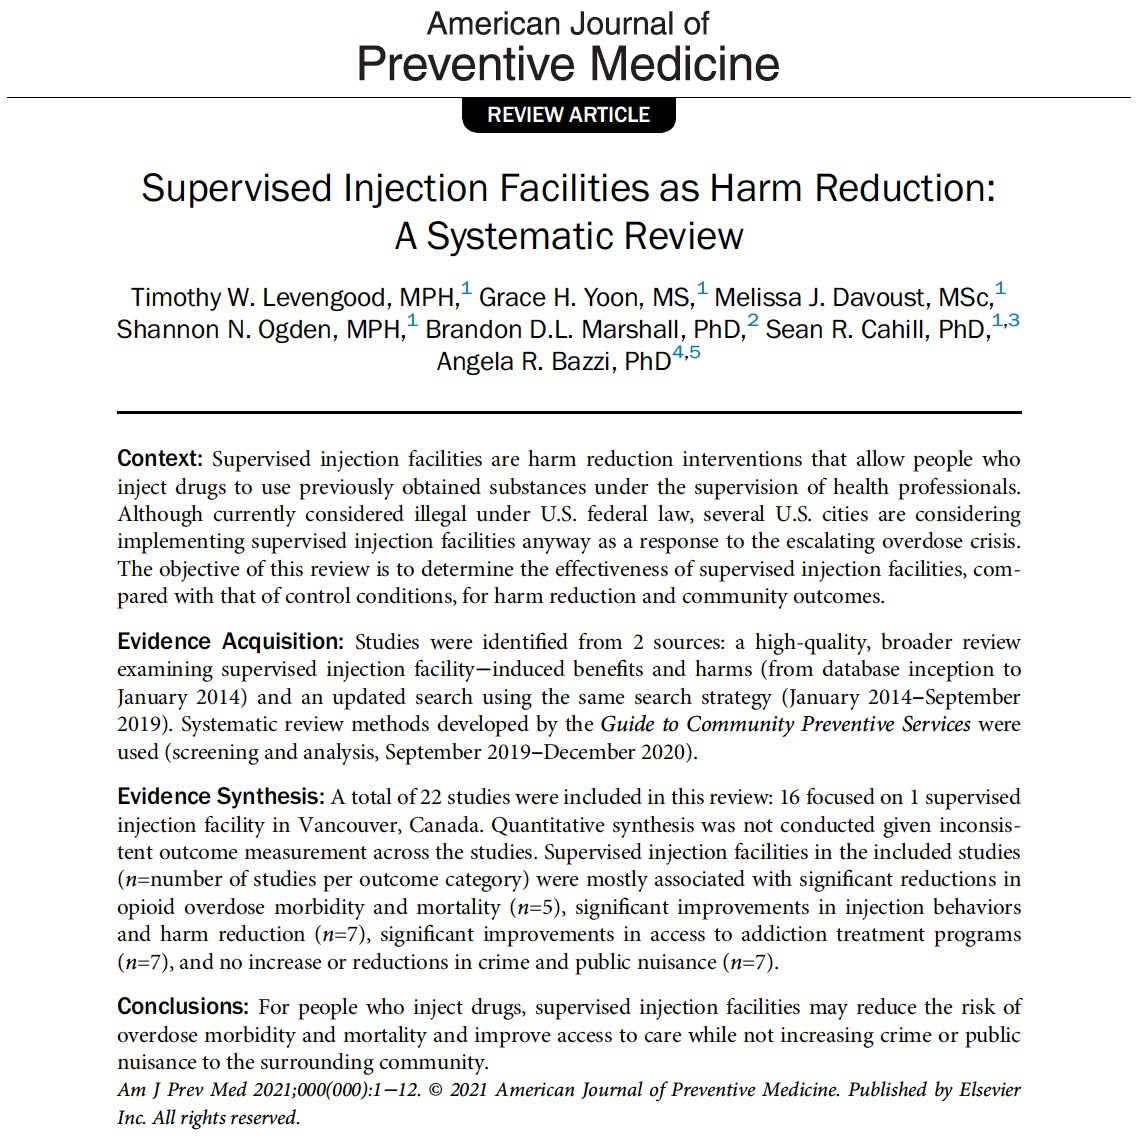 Our paper 'Supervised Injection Facilities as #HarmReduction: A #SystematicReview' is now out at @AmJPrevMed! authors.elsevier.com/a/1dKt22gOwG4d… SIFs assc. w/ ⬇️ overdose deaths ⬇️ drug harm ⬆️ access to care ⬇️ crime @angiebazzi @melissadavoust @sn_ogden @DrSeanCahill @BUSPH @Brown_SPH